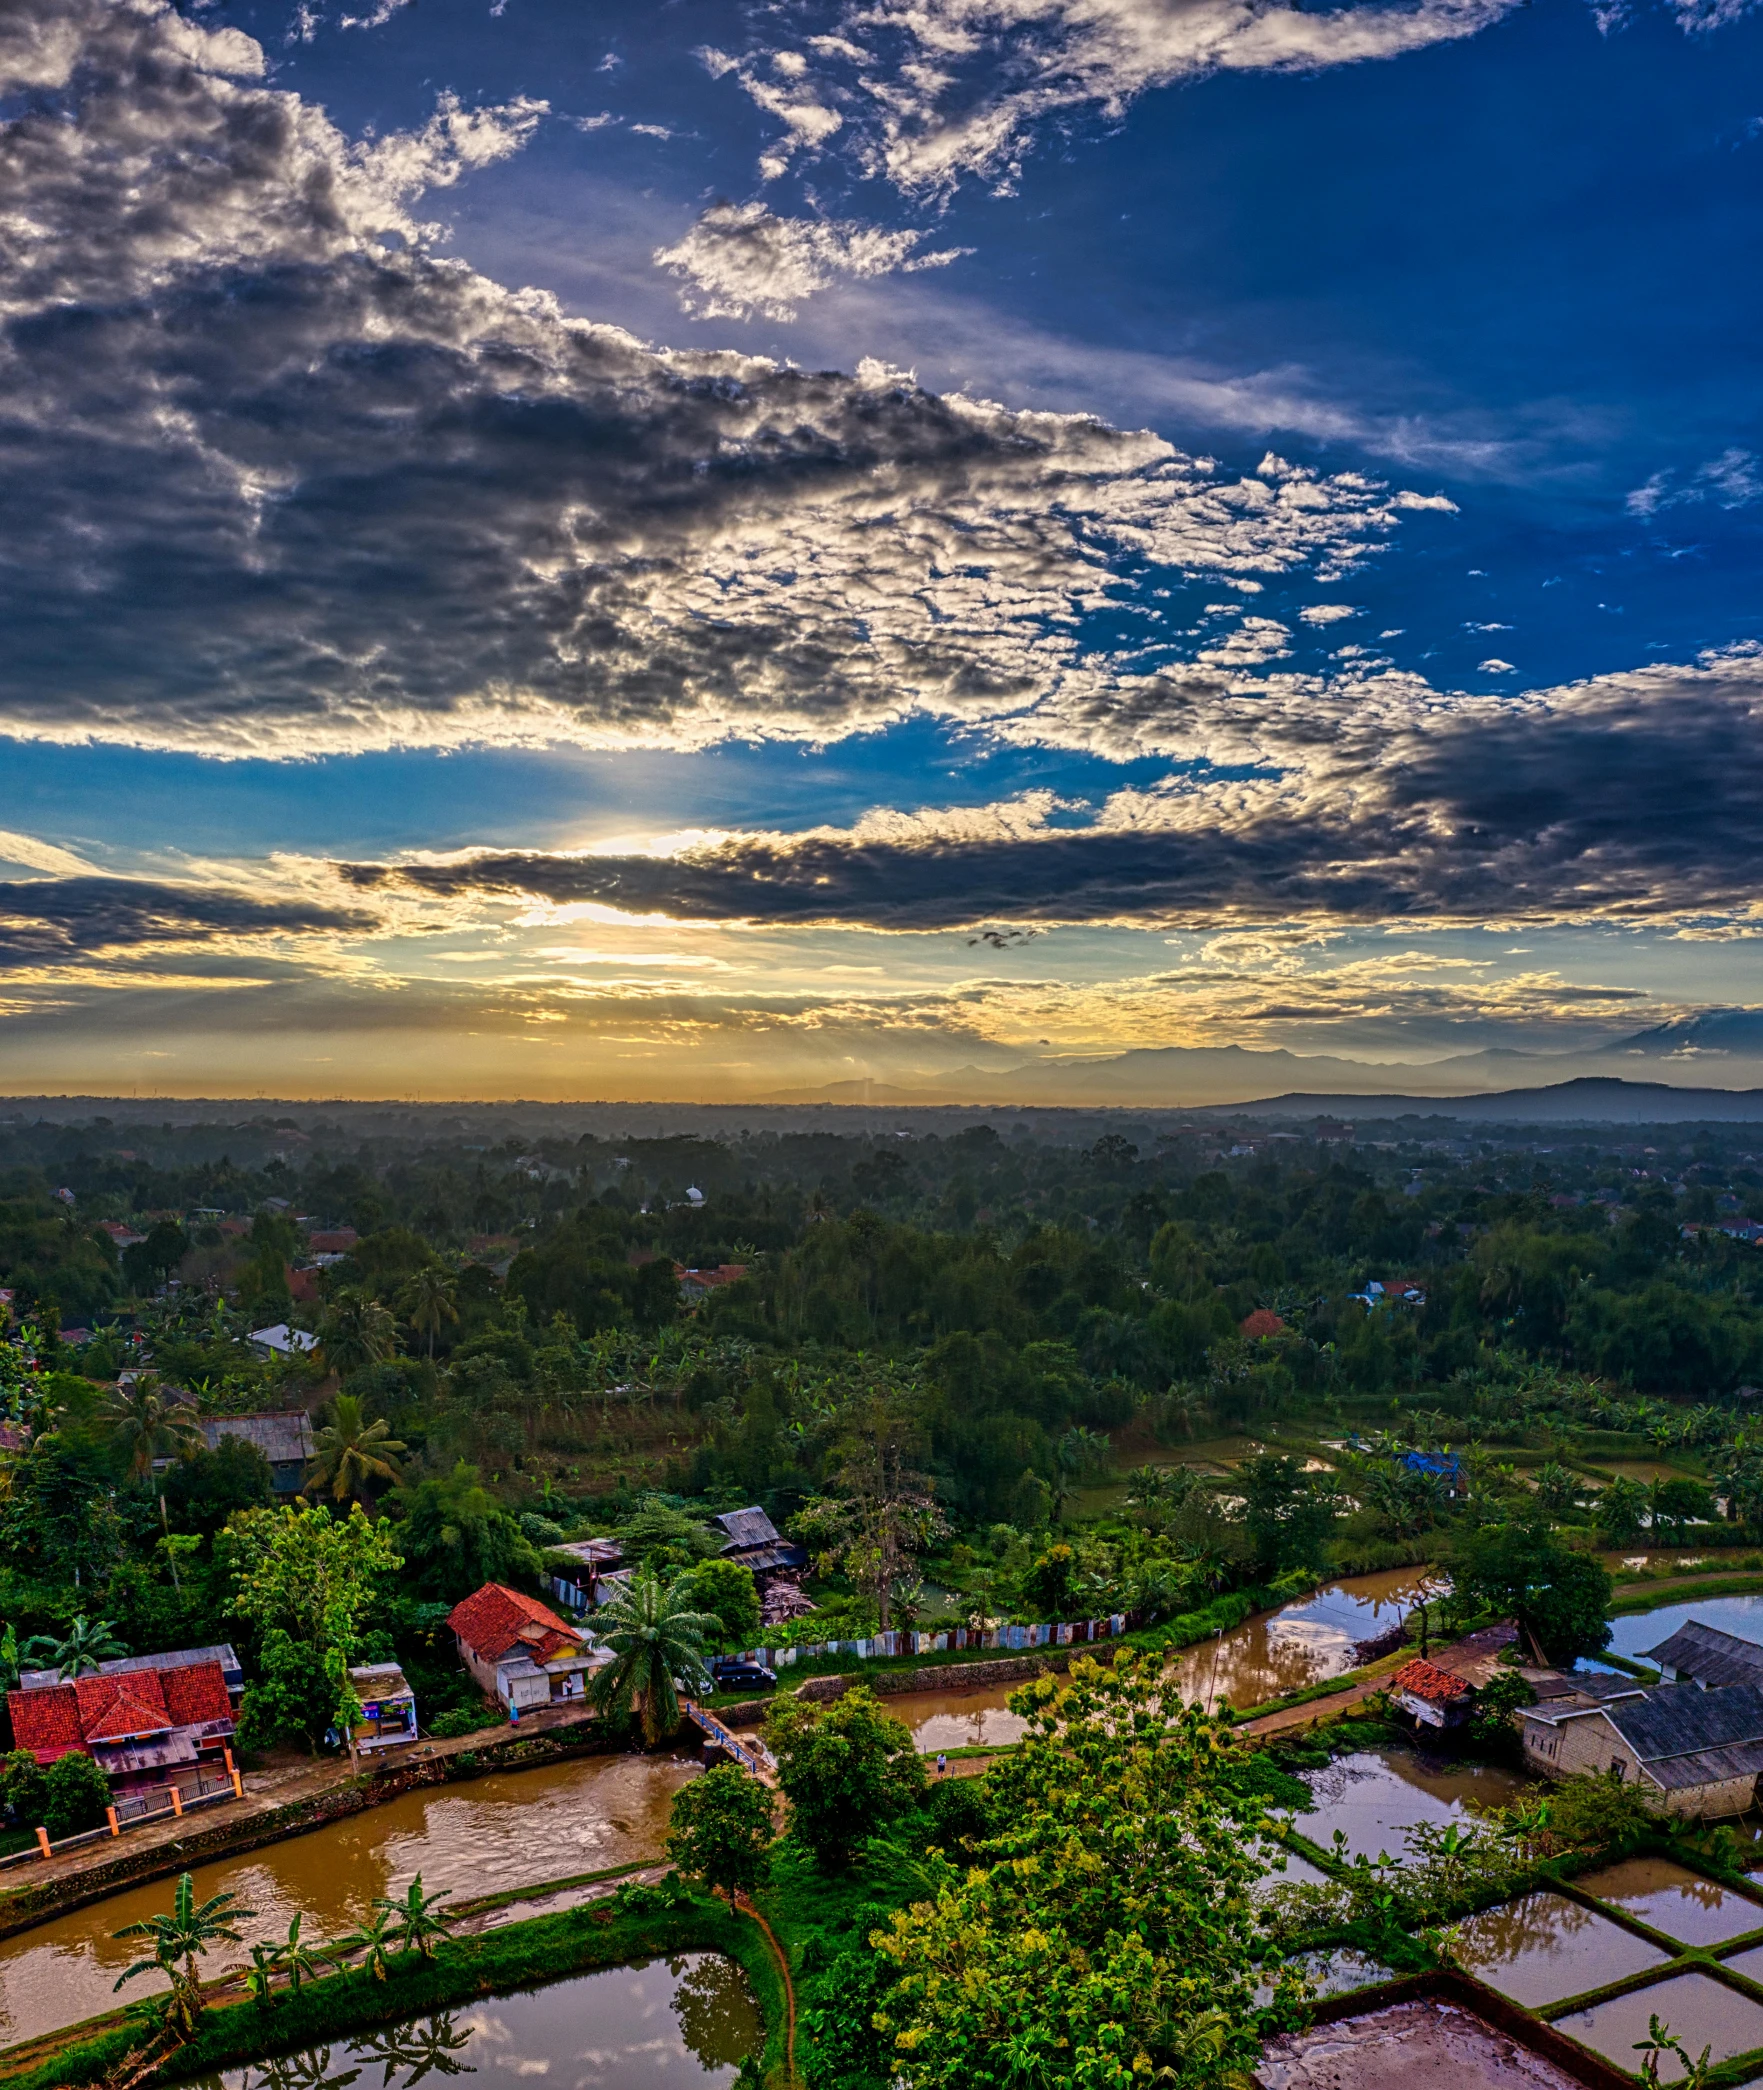 a river running through a lush green countryside, a picture, unsplash contest winner, sumatraism, vista of a city at sunset, square, cambodia, blue sky